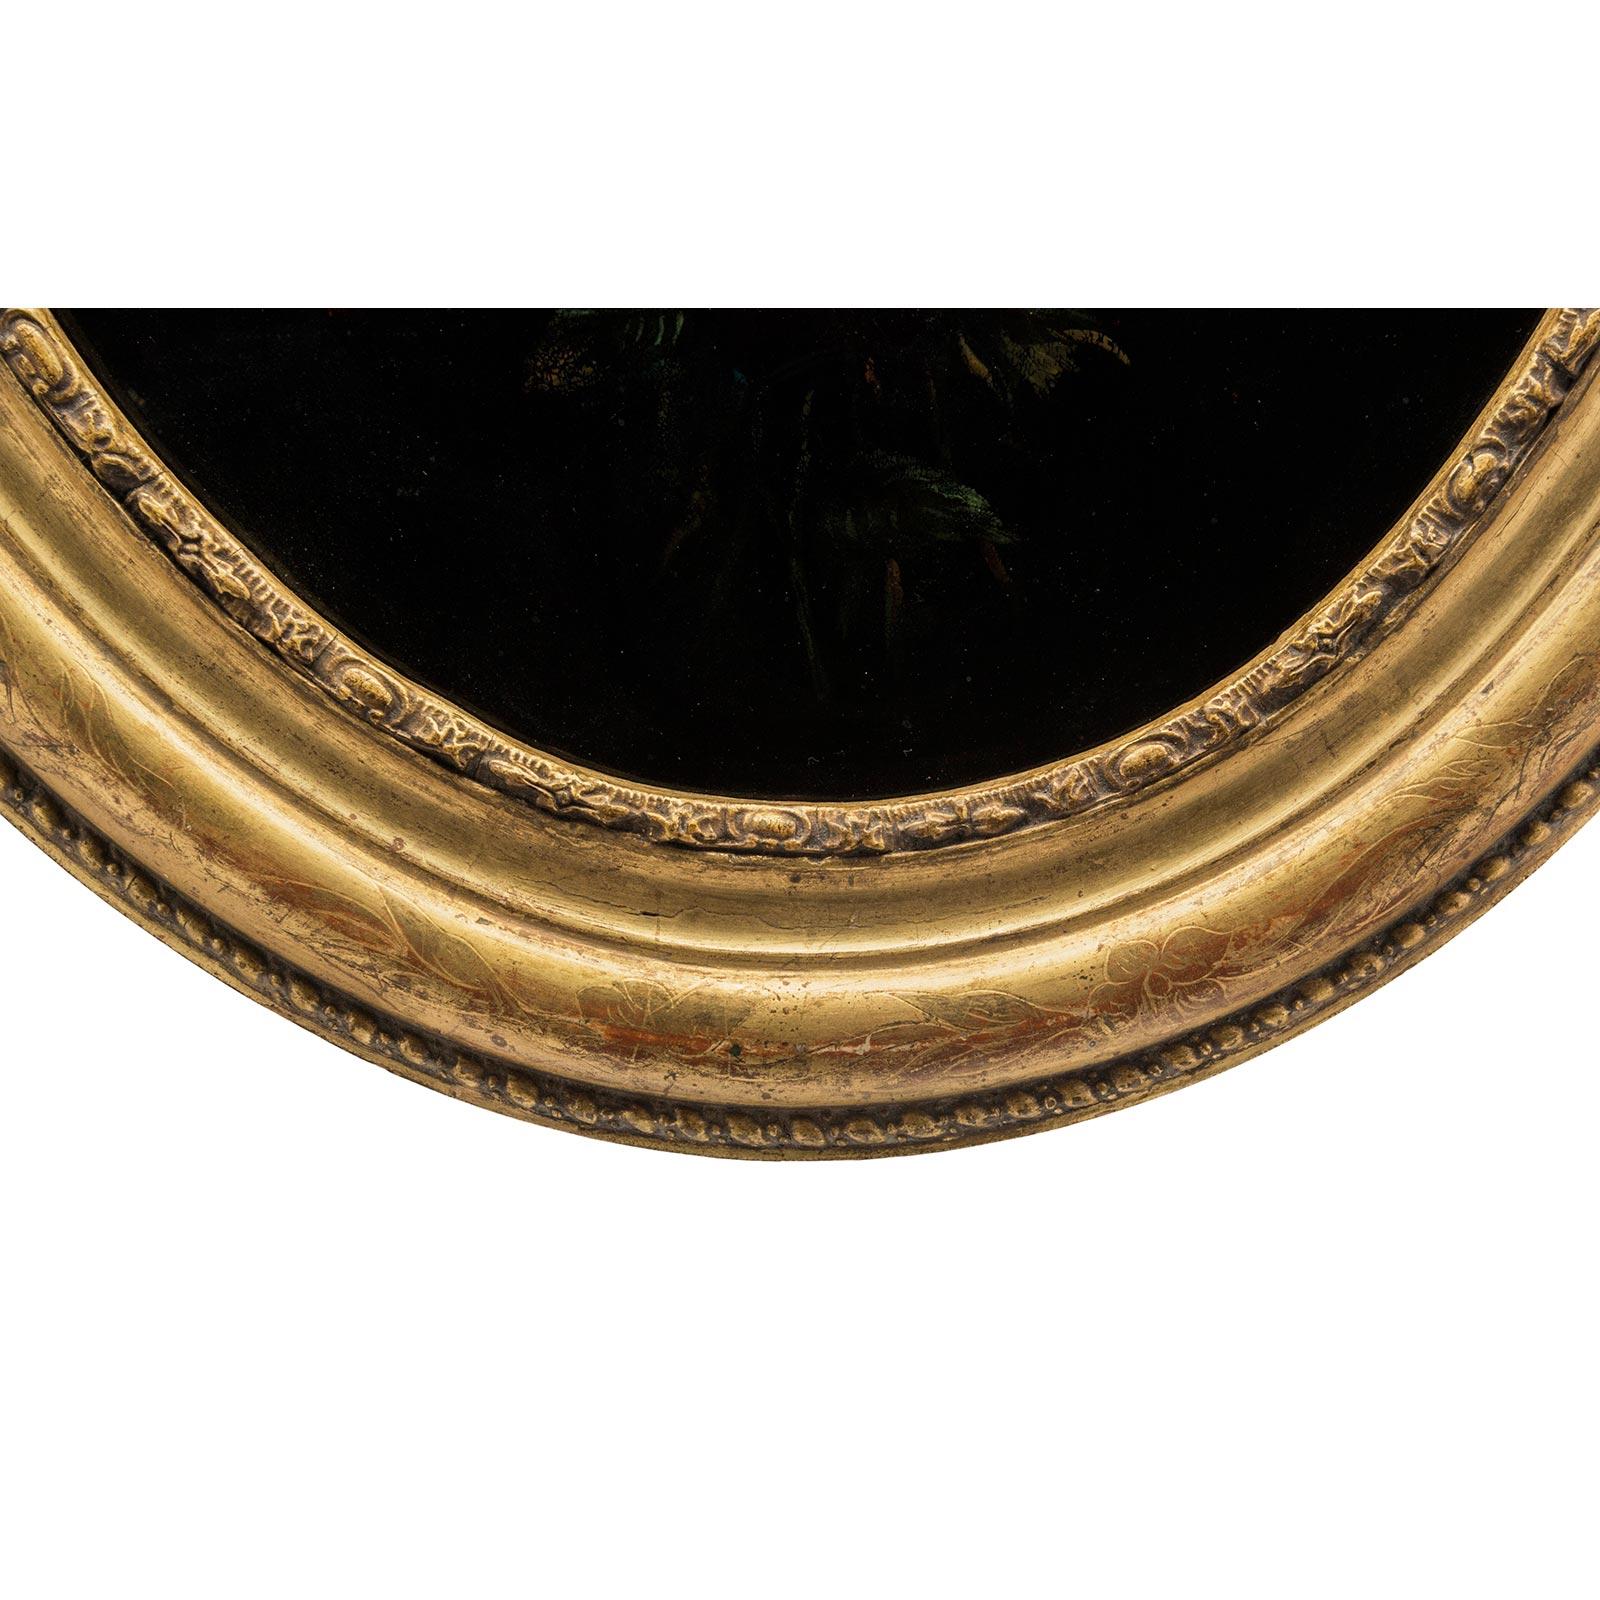 Italian 19th Century Louis XVI Style Oval Reverse Painted on Glass Still Lifes For Sale 6